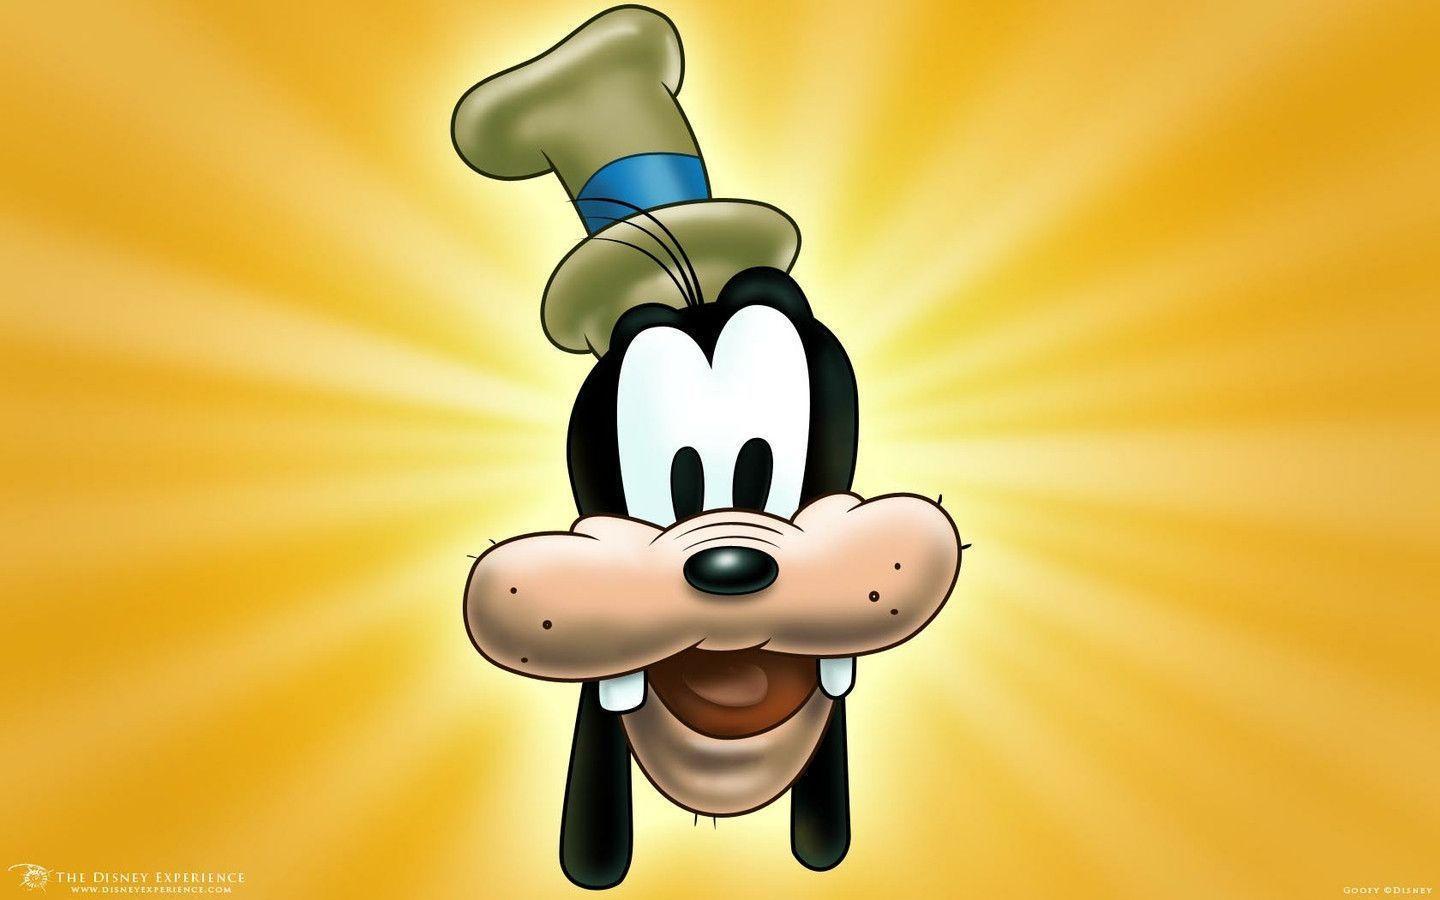 Background Goofy Ahh Wallpaper Discover more Comic Cute Goofy Ahh  Guandale Memes wallpaper httpswwwenwallpapercombackgrou  Goofy  Background Wallpaper